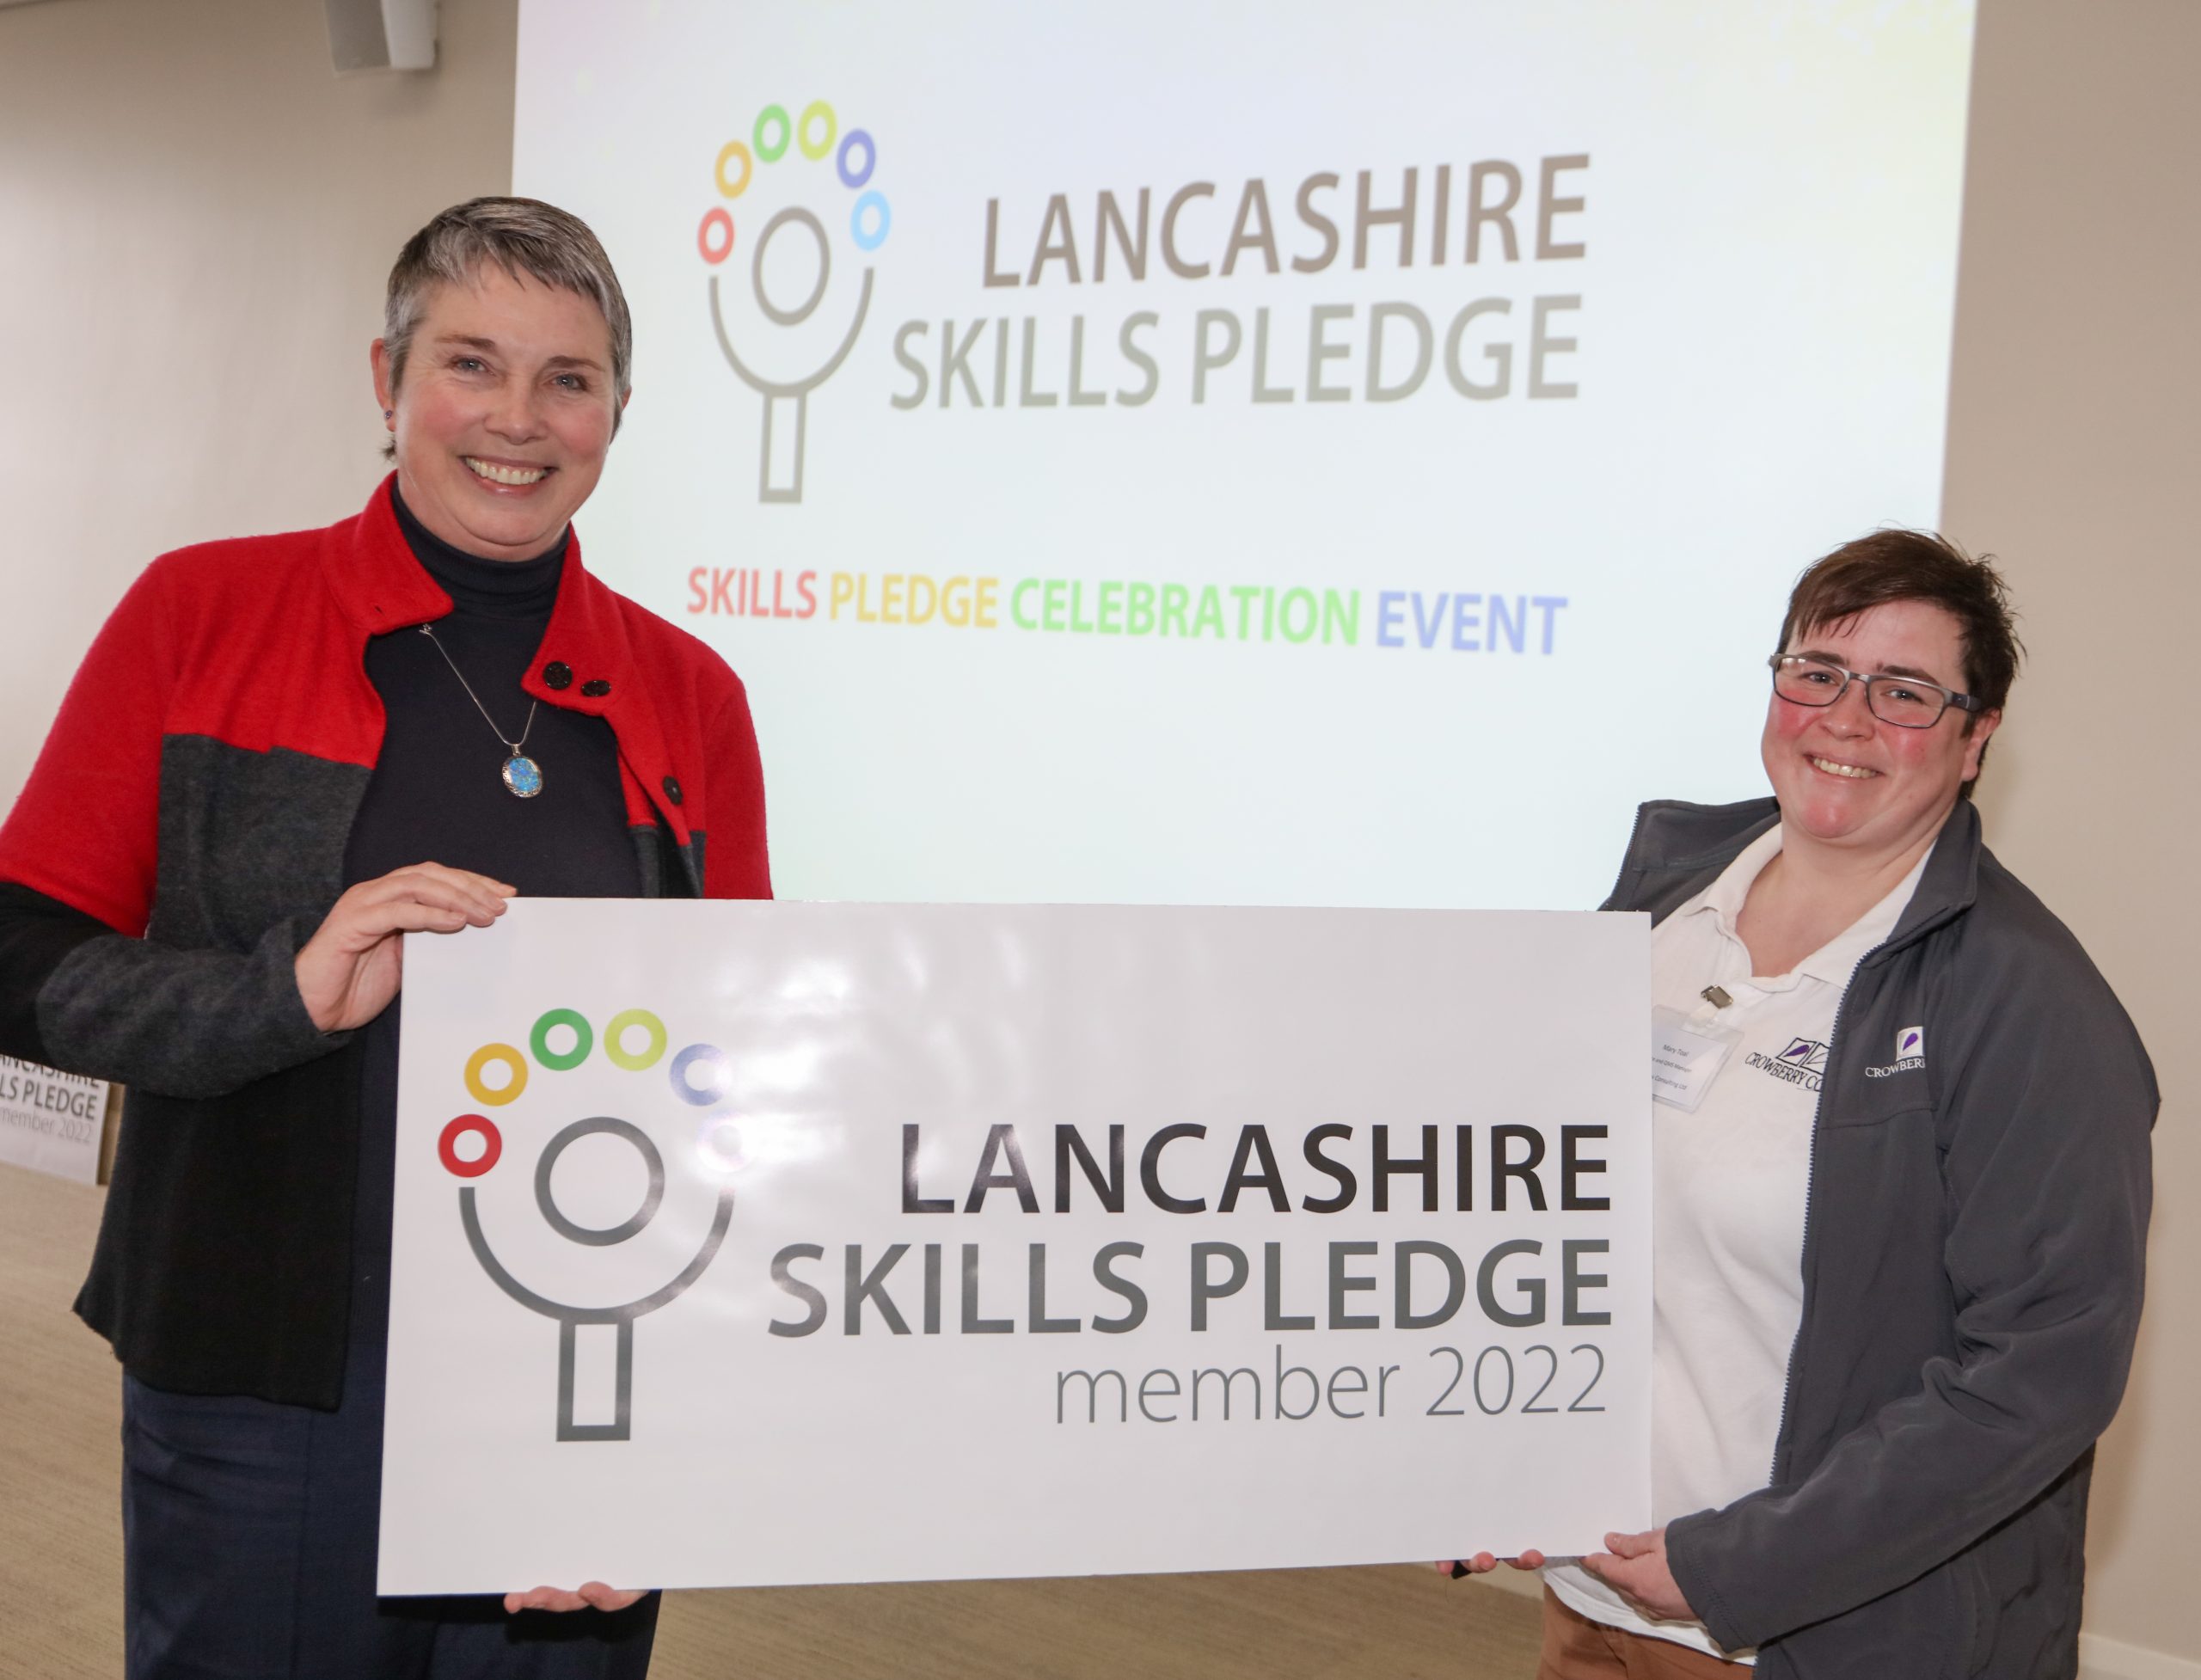 Crowberry Consulting recommits to the Lancashire Skills Pledge 2022